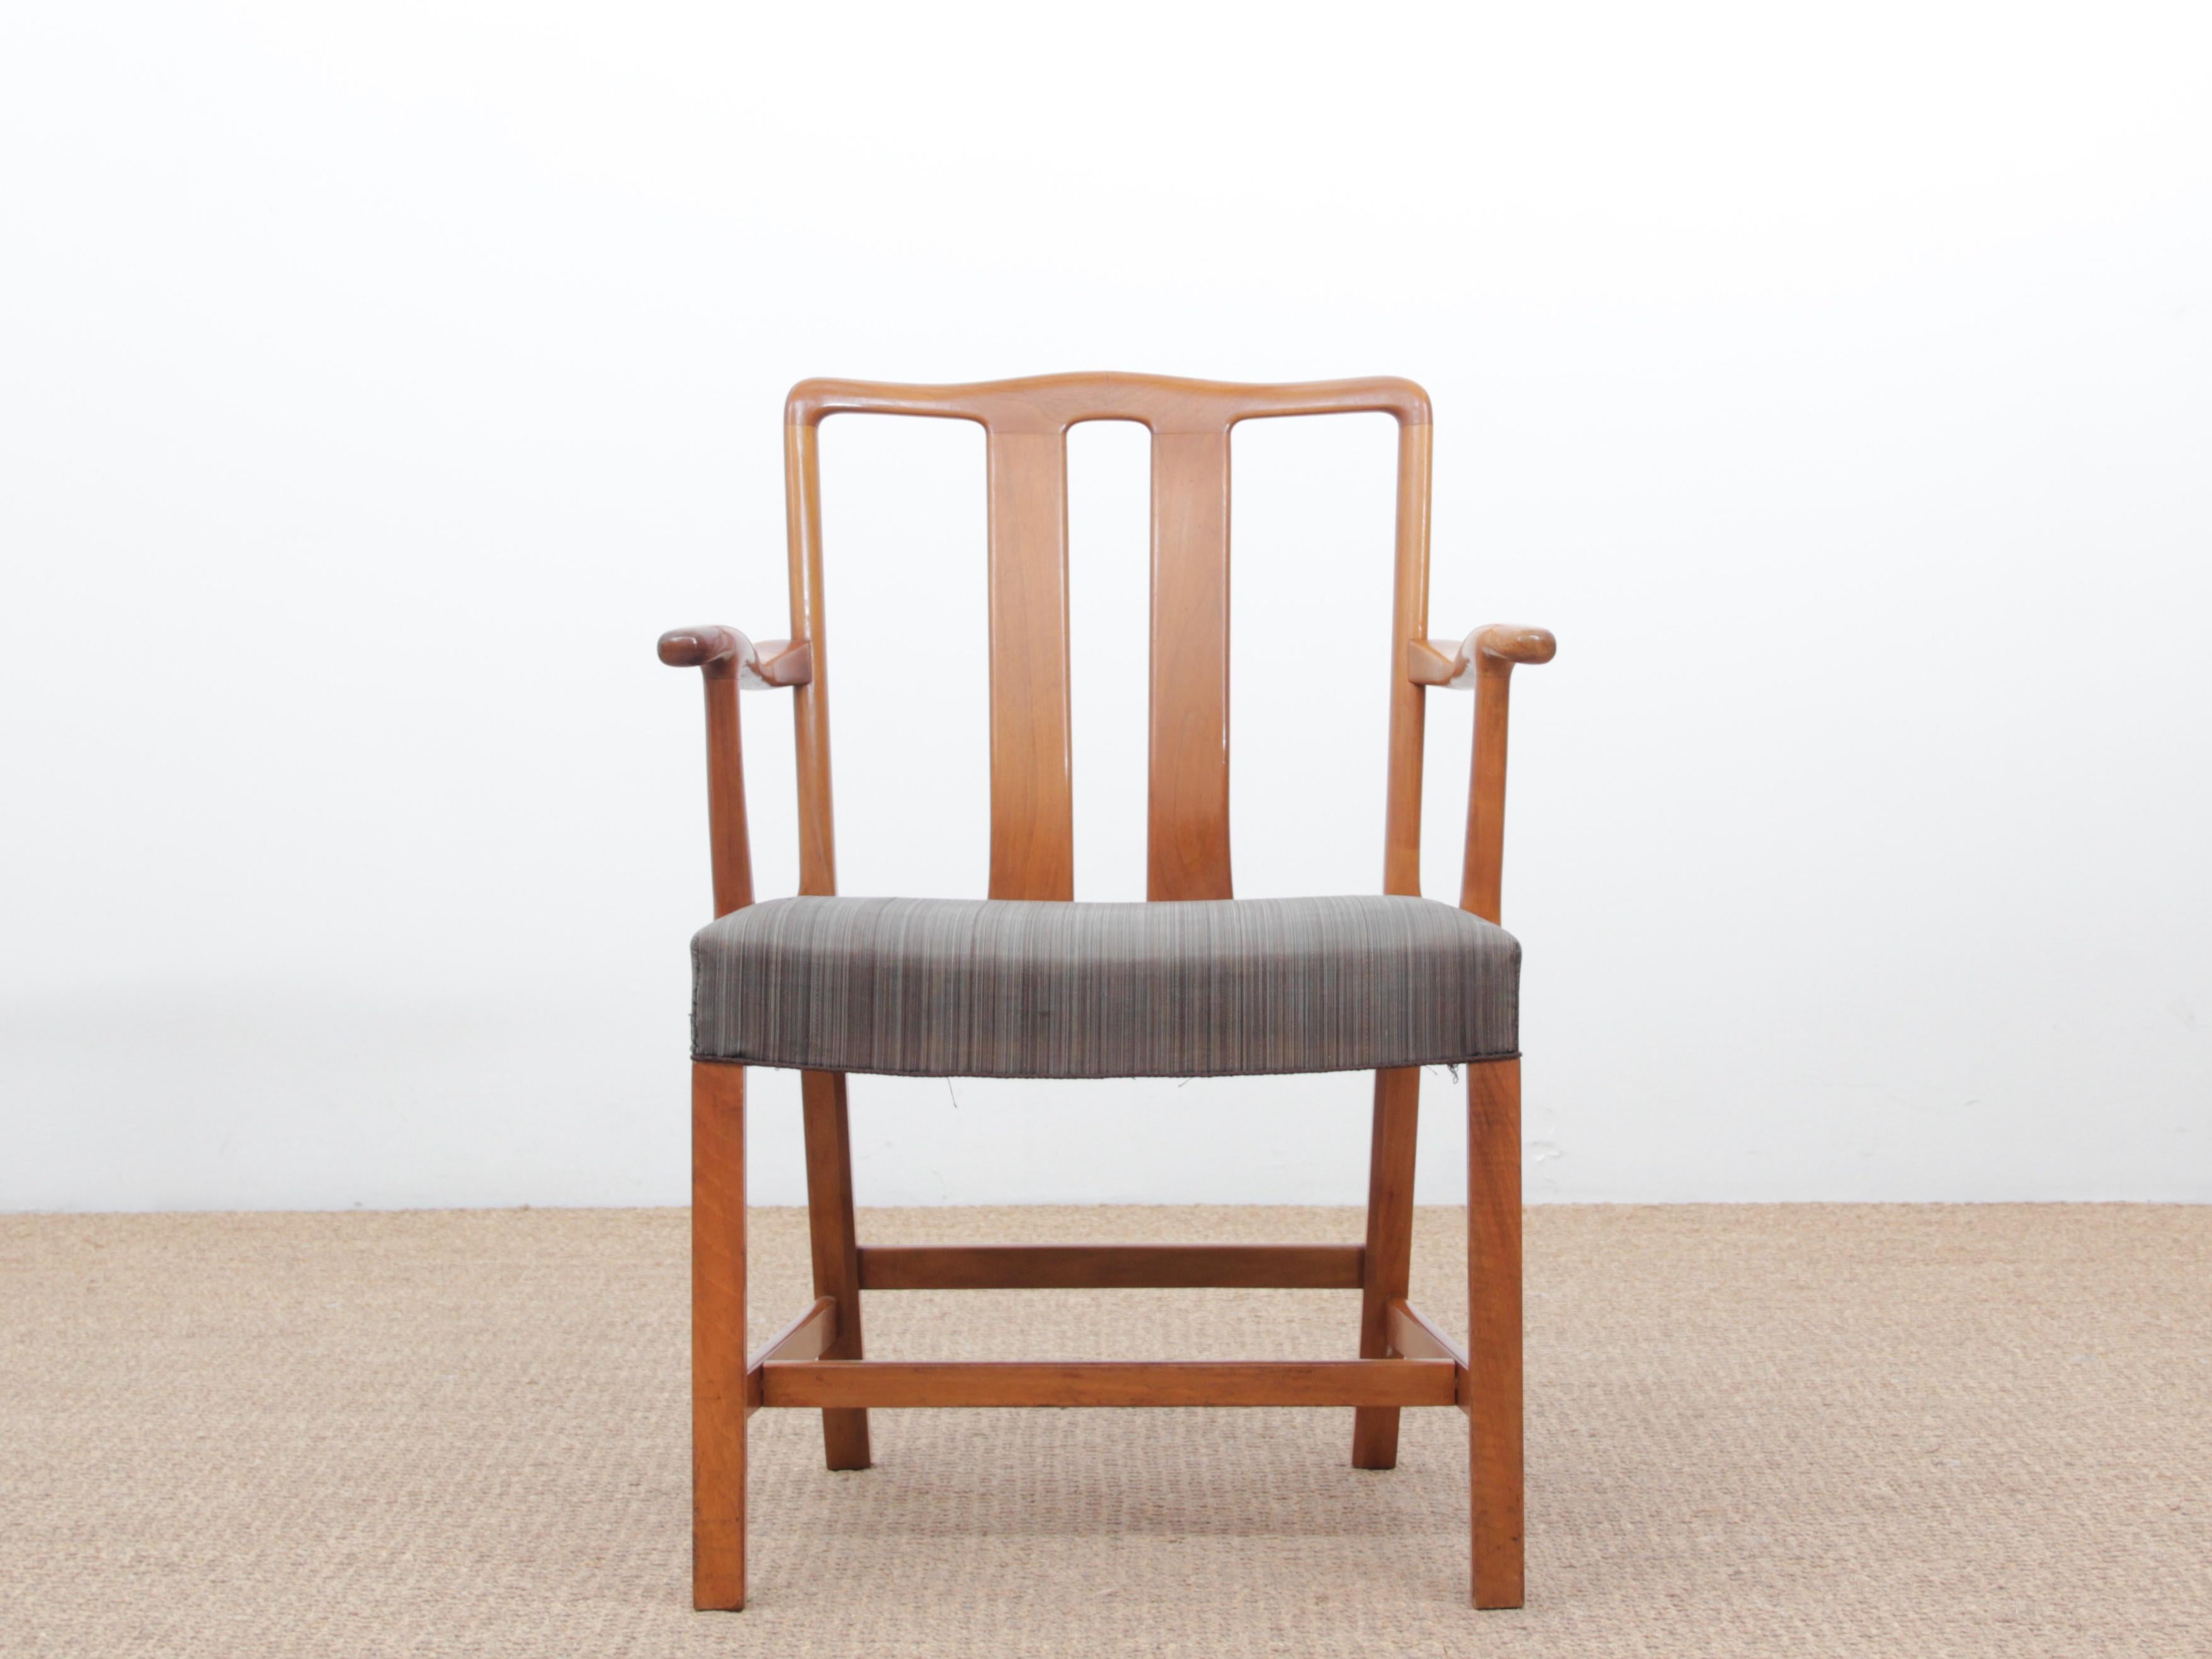 Mid-20th Century Mid-Century Modern Scandinavian Pair of Armchairs by Ole Wancher For Sale